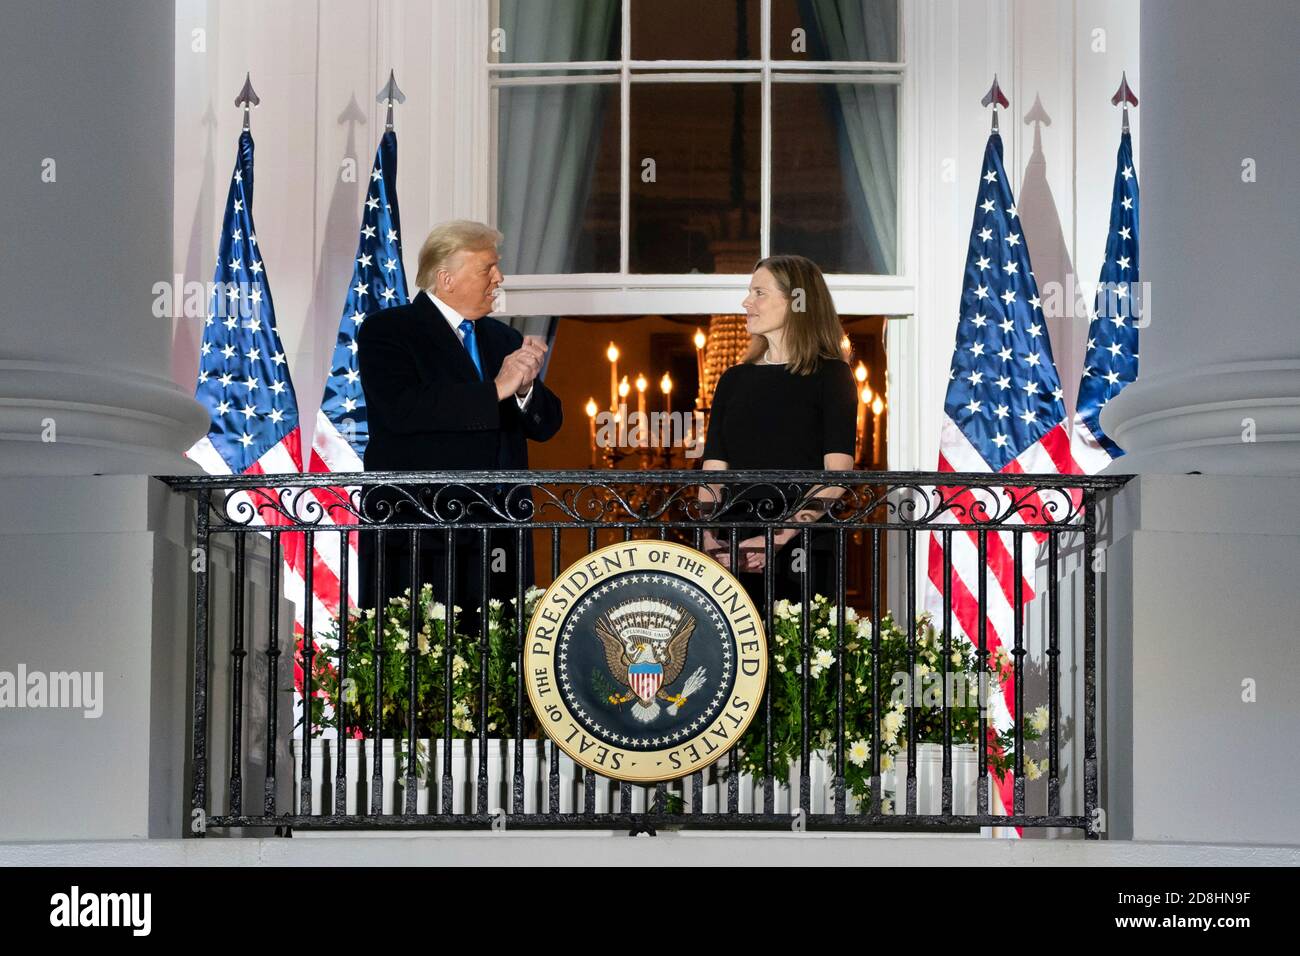 U.S President Donald Trump applauds Supreme Court Associate Justice Amy Coney Barrett from the Blue Room Balcony of the White House following the swearing in ceremony October 26, 2020 in Washington, DC. Stock Photo